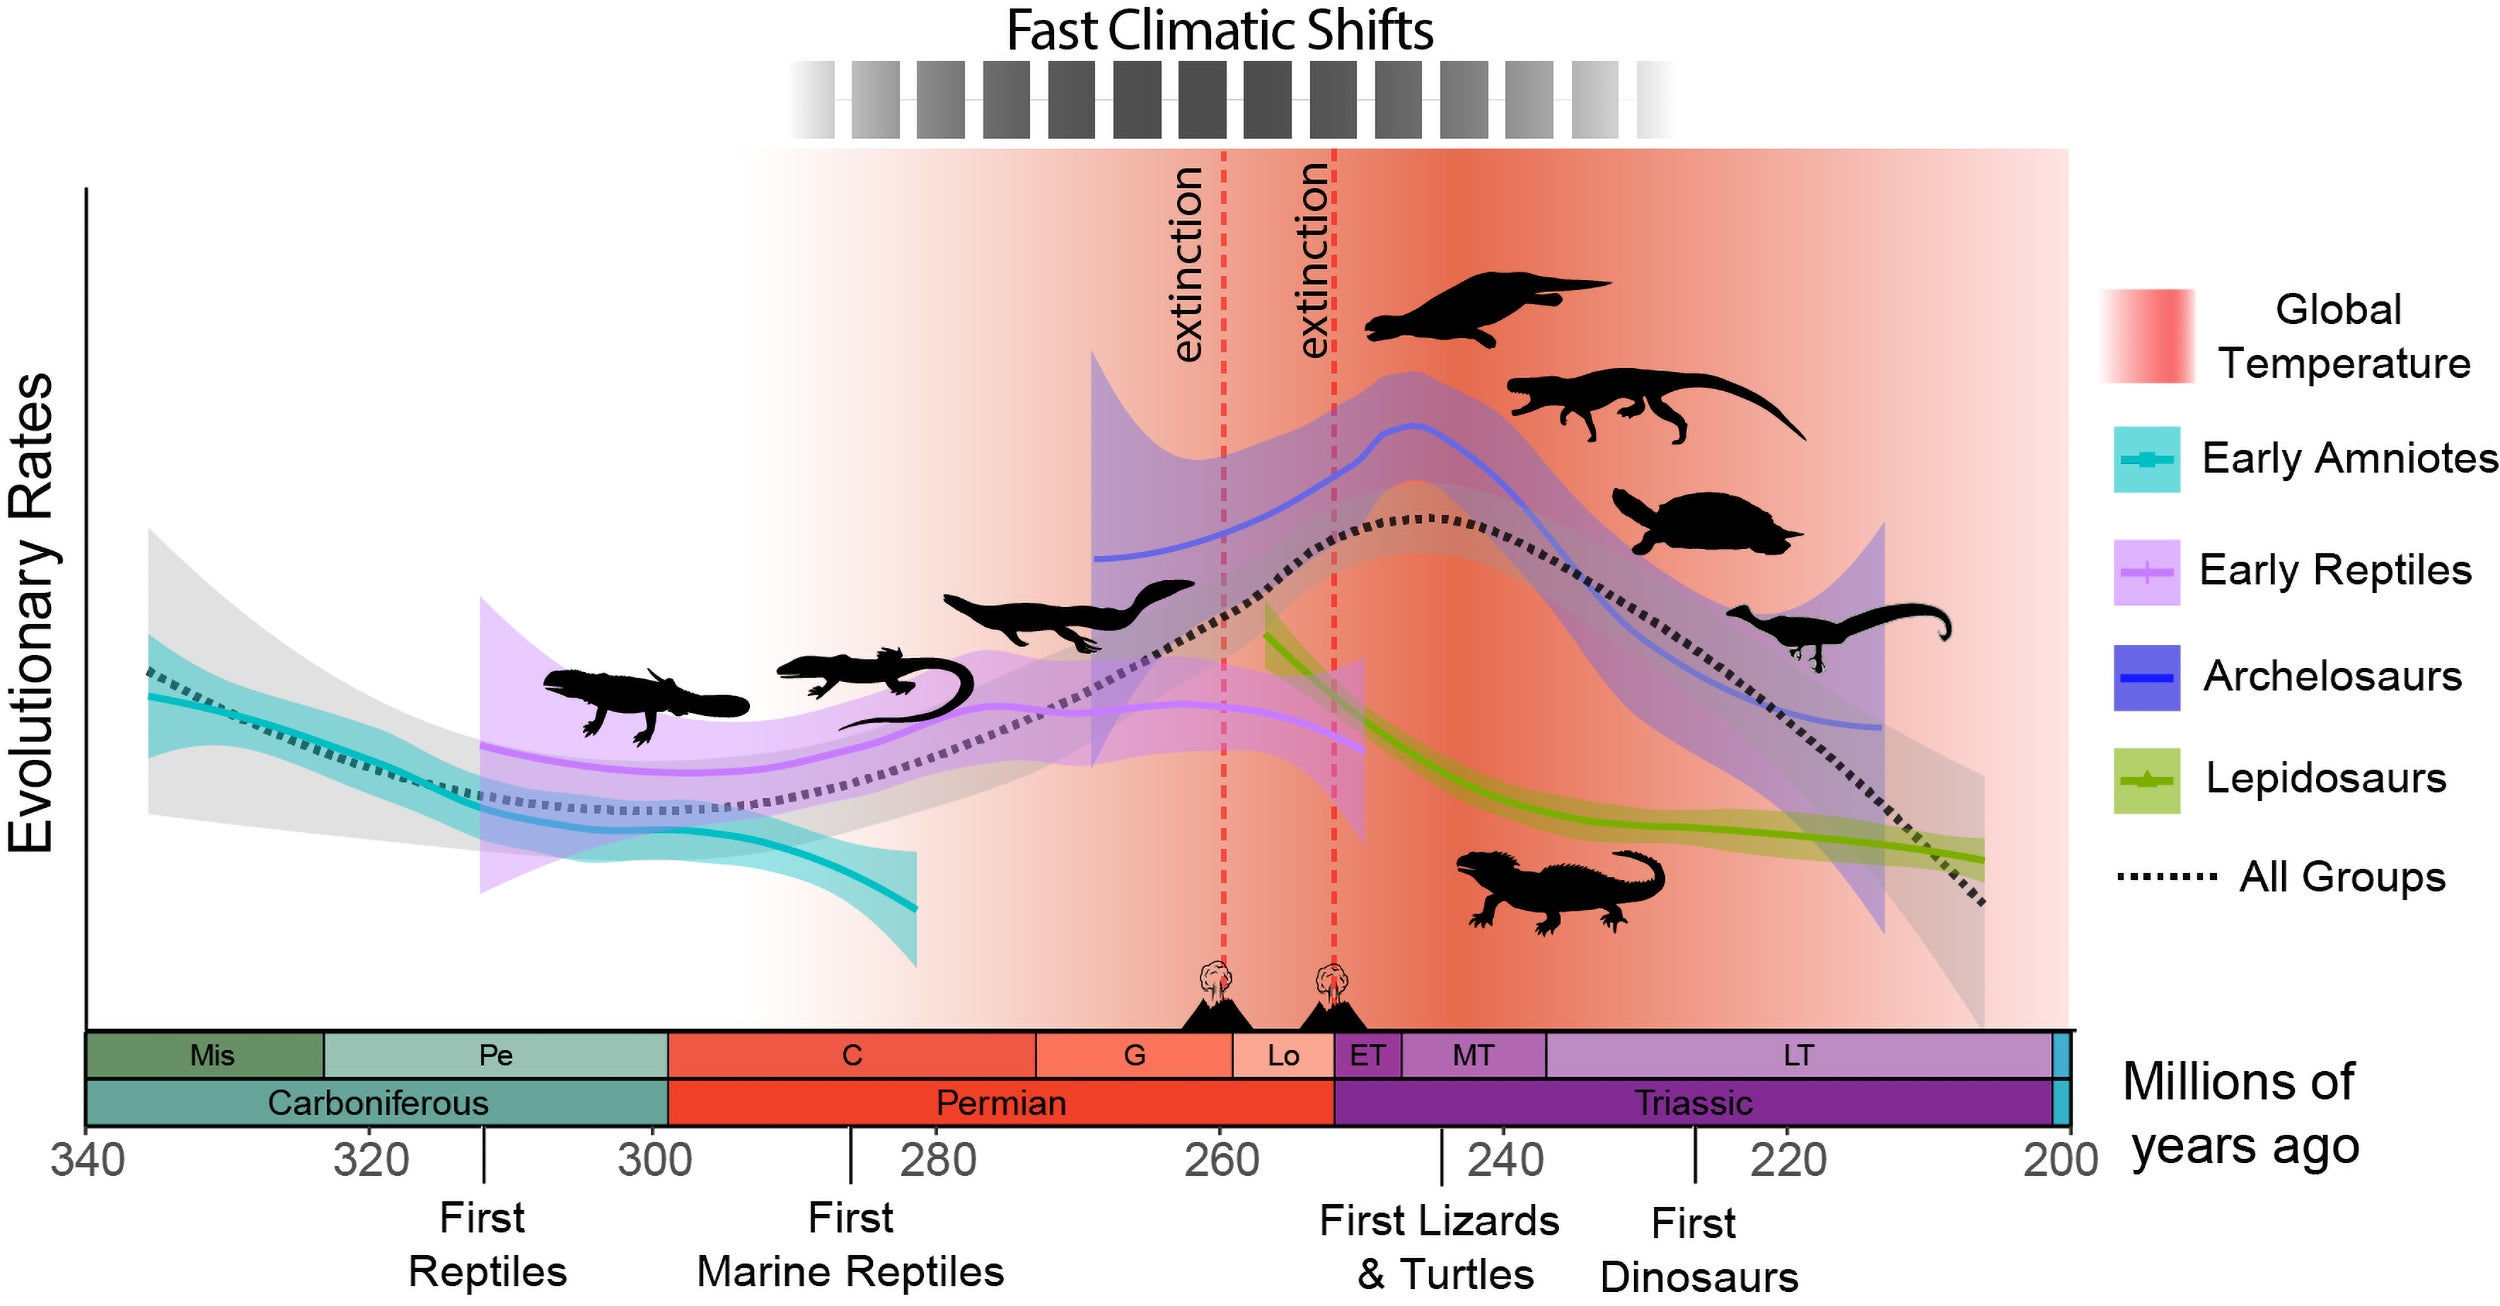 Chart shows rates of evolution (adaptive anatomical changes) in reptiles start increasing early in the Permian (at about 294 million years ago), which also marks the onset of the longest period of successive fast climatic shifts in the geological record. From 261 until 235 million years ago, increased global warming from massive volcanic eruption contributed to further climate change and led to the hottest period in Earth’s history. This resulted in two mass extinctions and the demise of reptile competitors on land (mammalian ancestors). The most intensive period of global warming coincided with the fastest rates of evolution in reptiles, marking the diversification of reptile body plans and the origin of modern reptile groups.